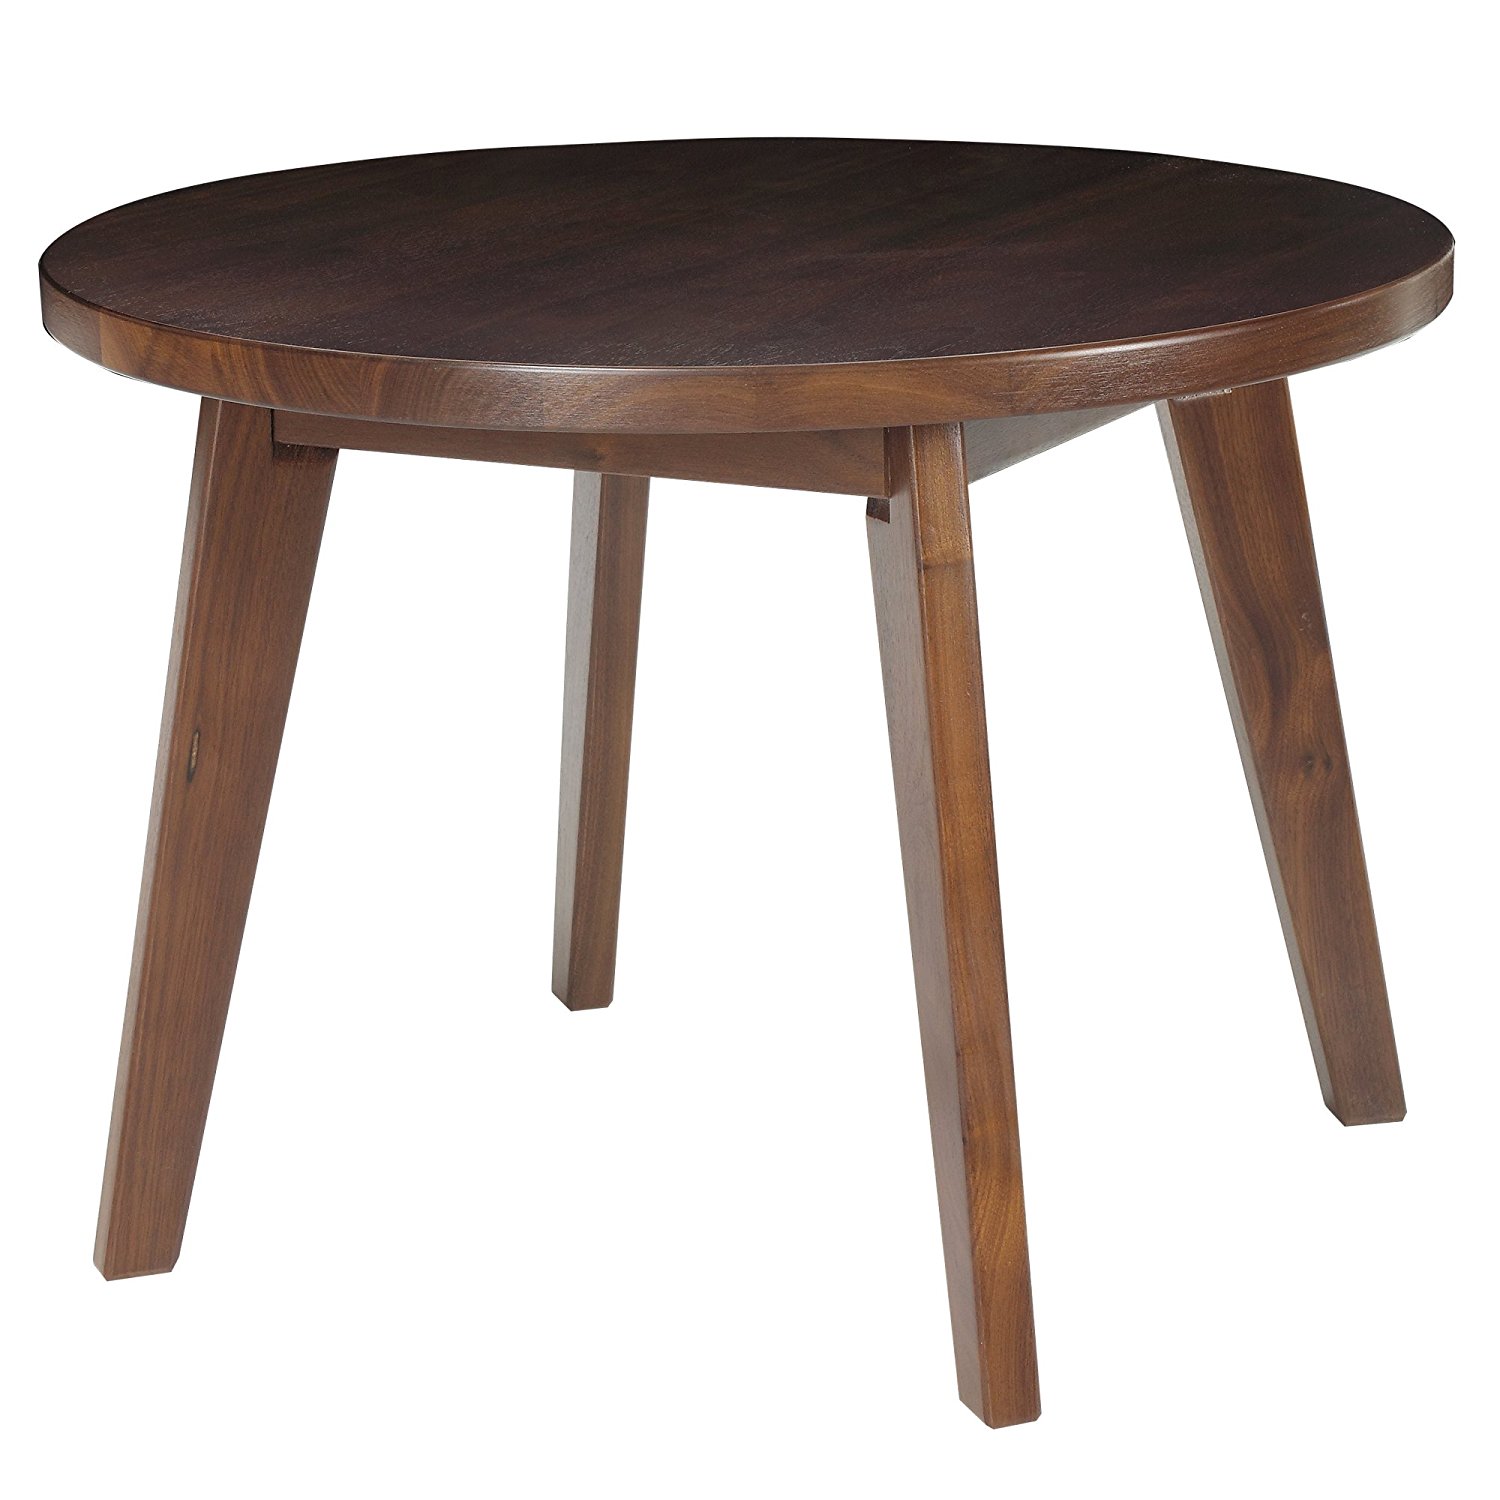 Simple wood coffee table in a small round shape